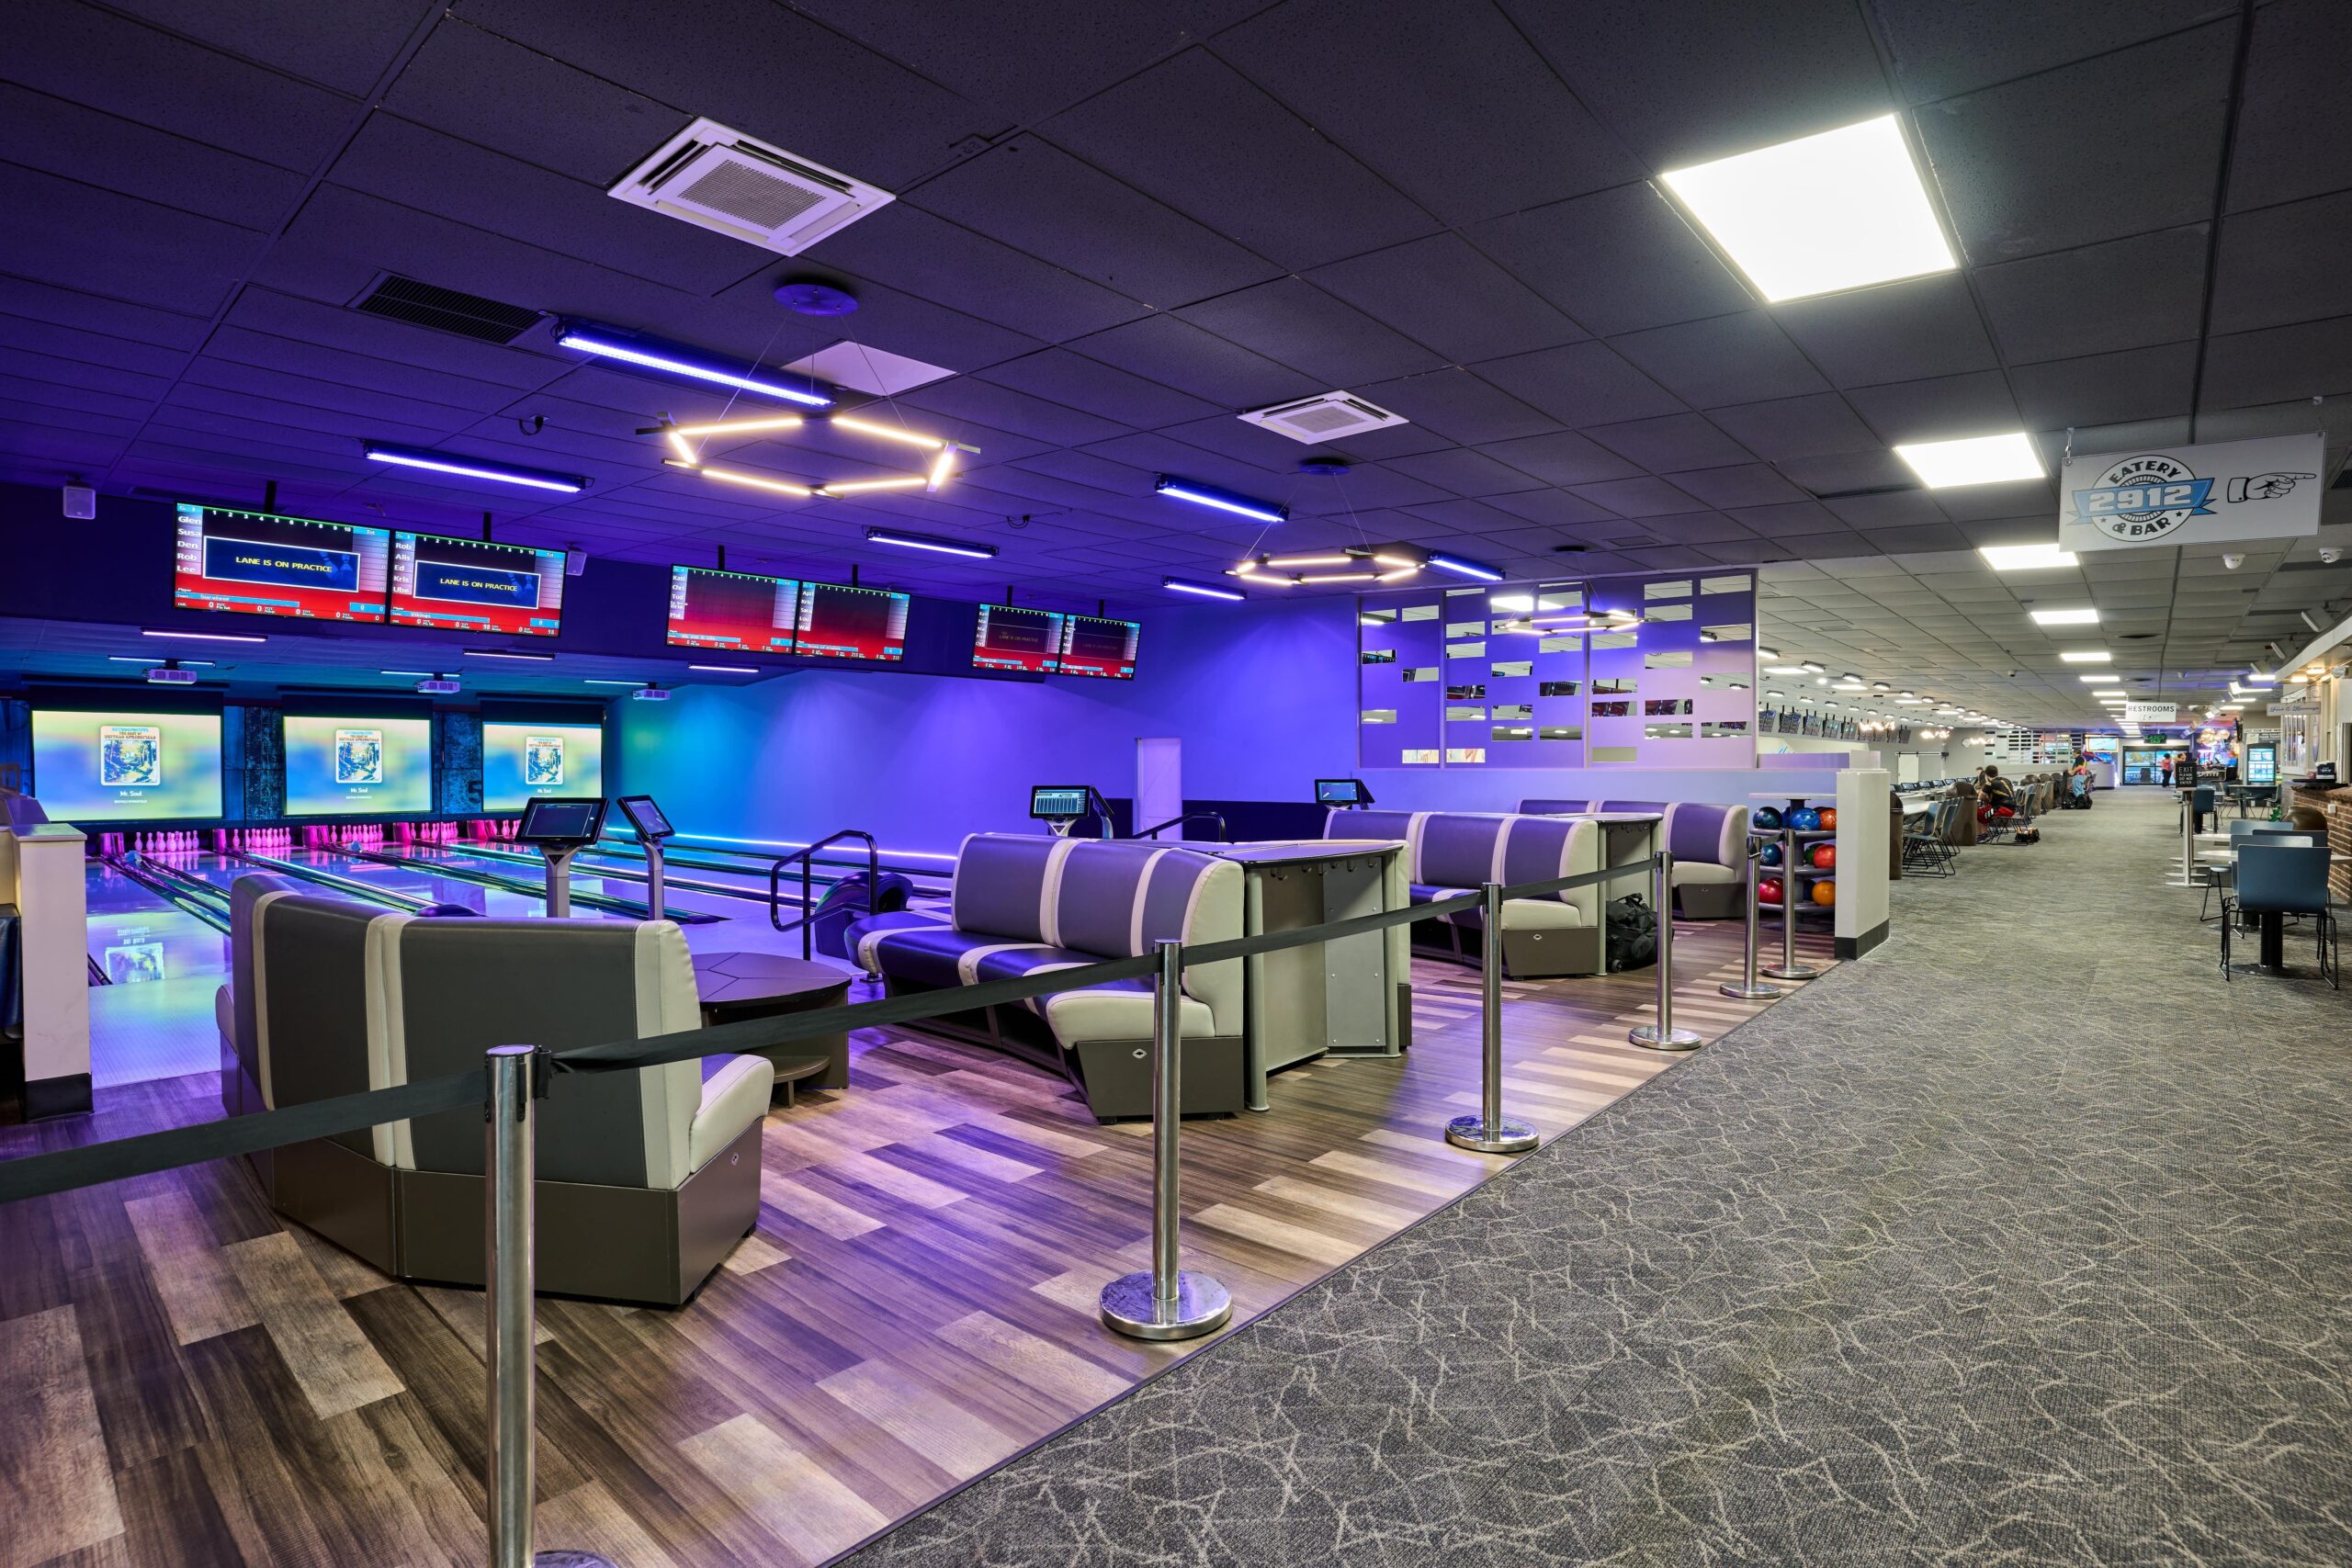 Party Packages That Score: Choosing the Right Bowling Package for Your Celebration